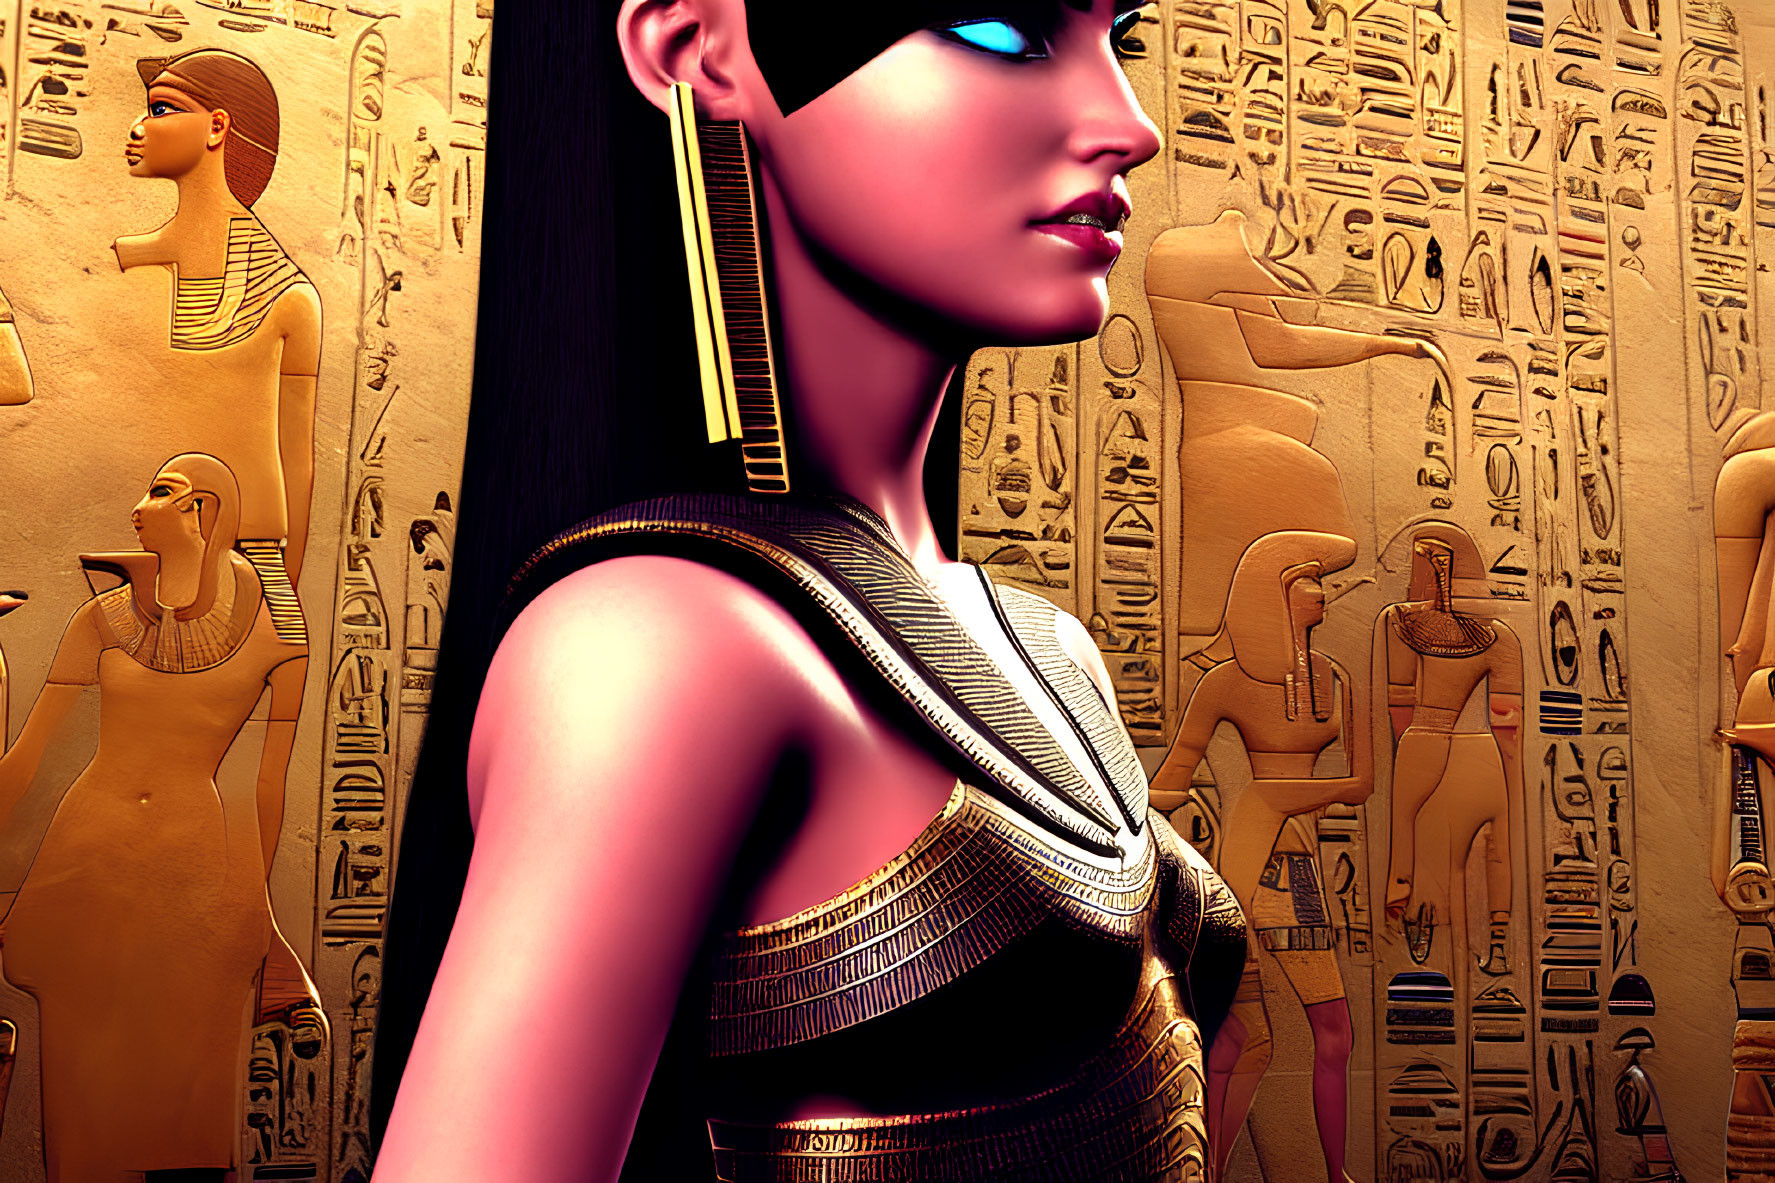 3D-rendered female character in ancient Egyptian attire with hieroglyph-covered walls